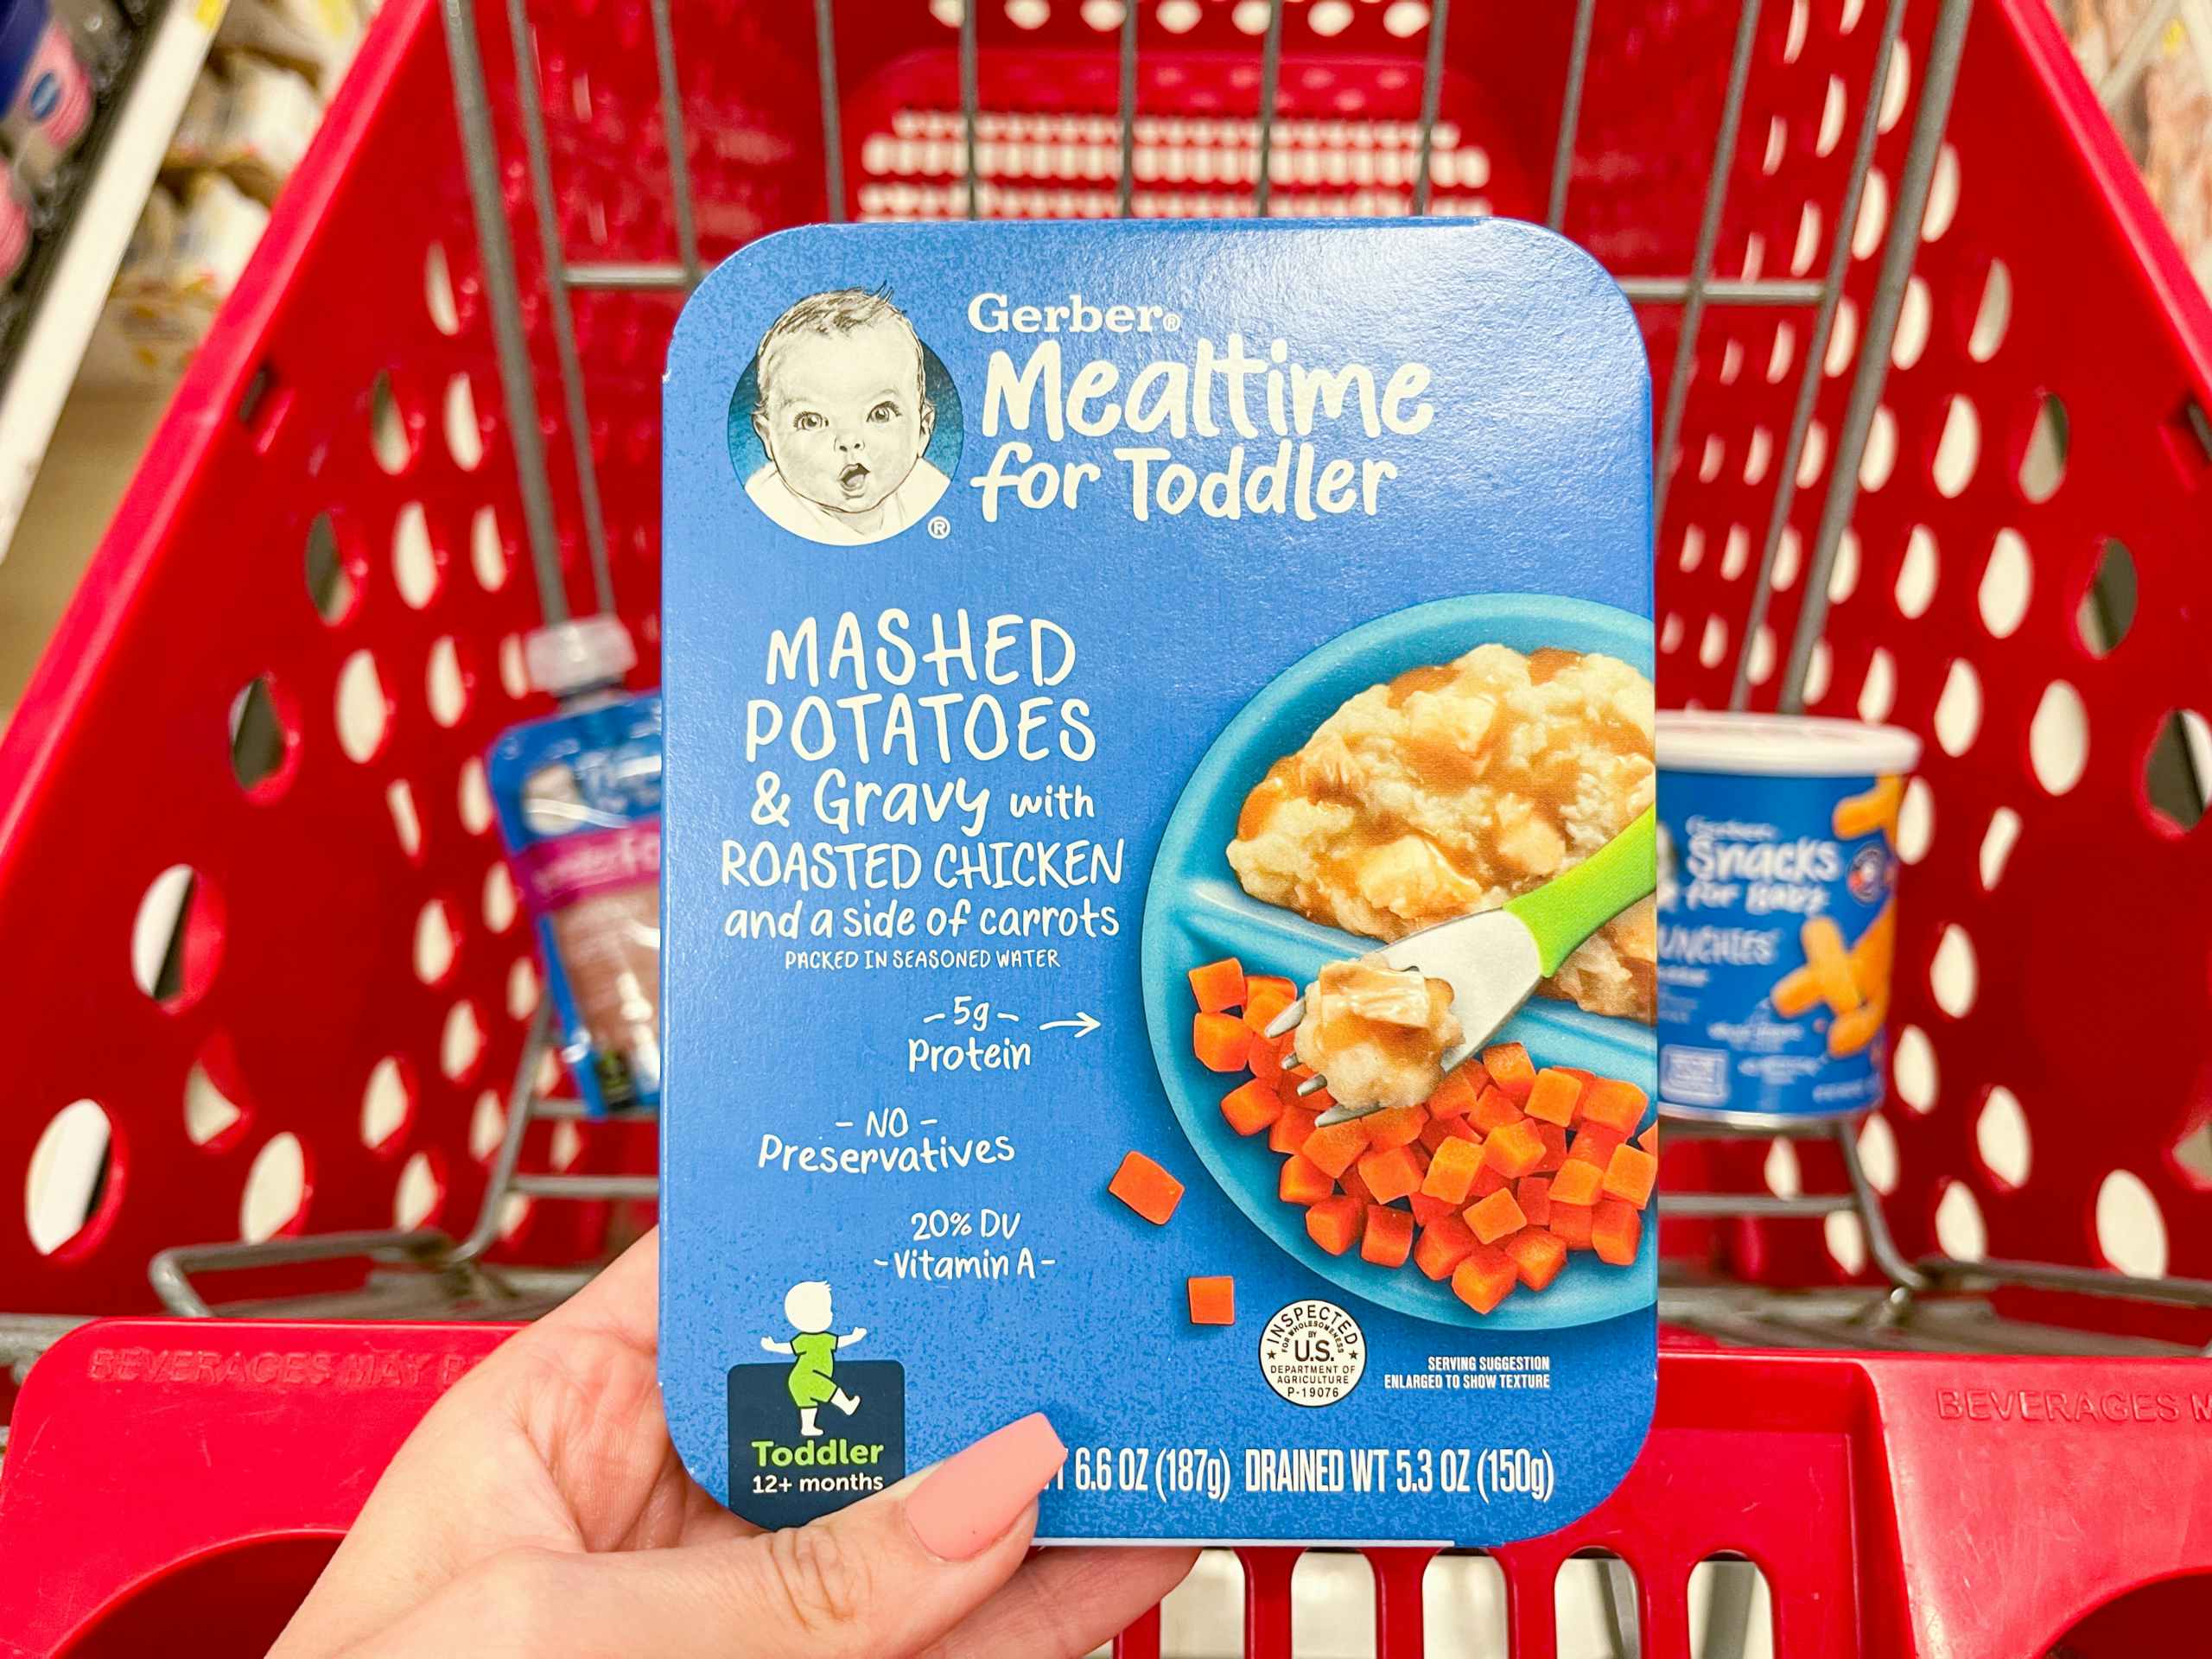 A Gerber Mealtime for toddler meal held out by hand in front of a store cart with other Gerber items in it.